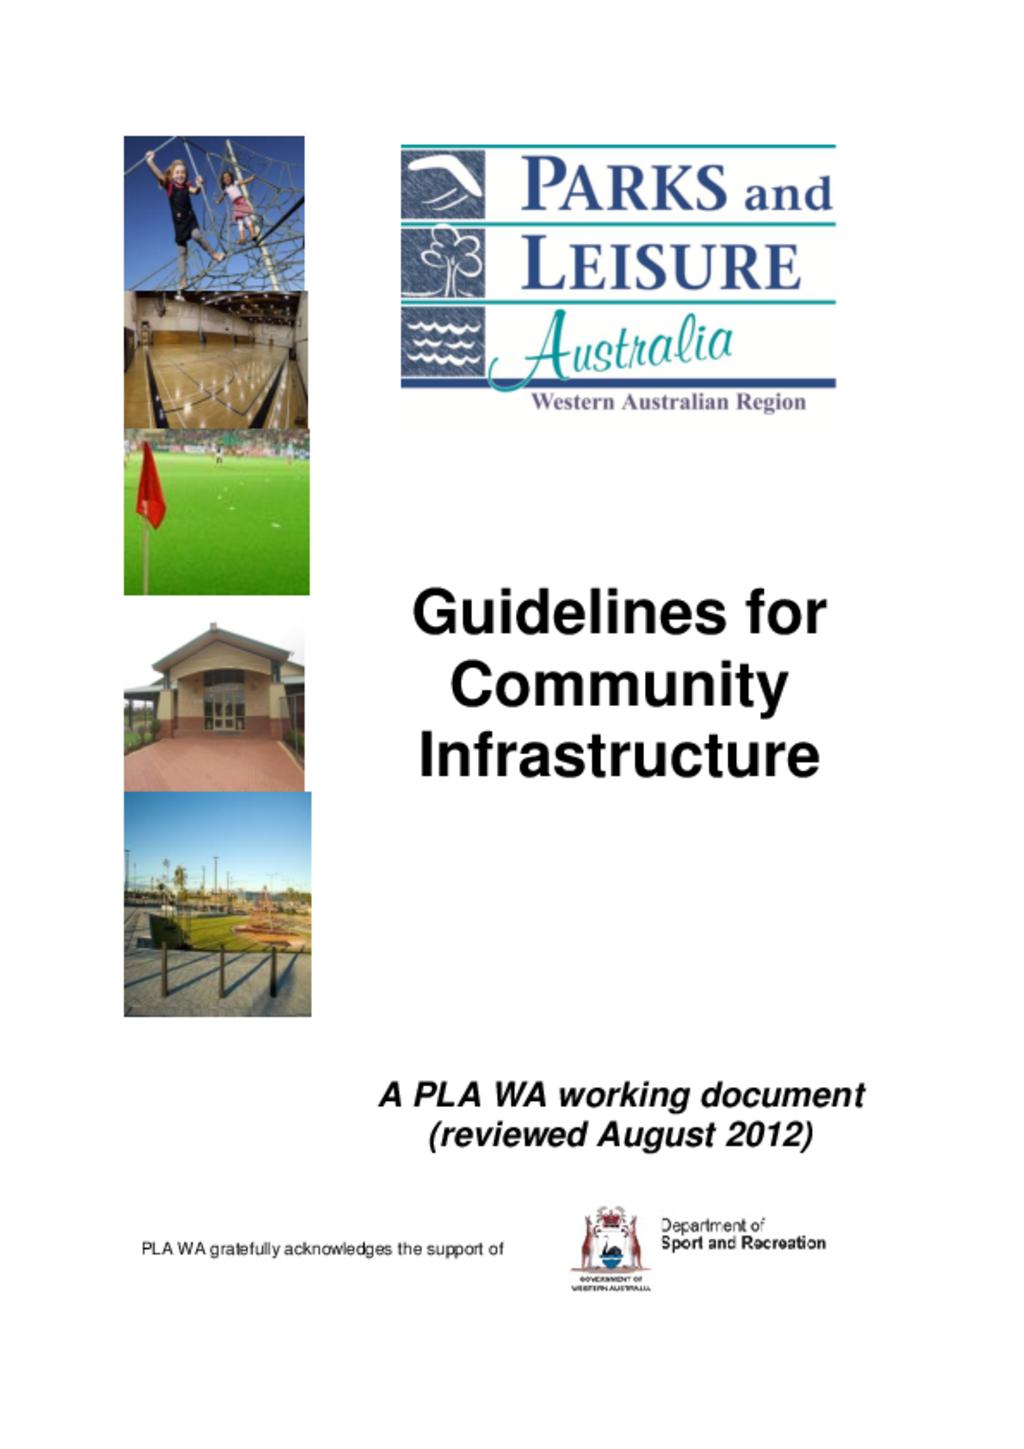 Community Infrastructure Guidelines